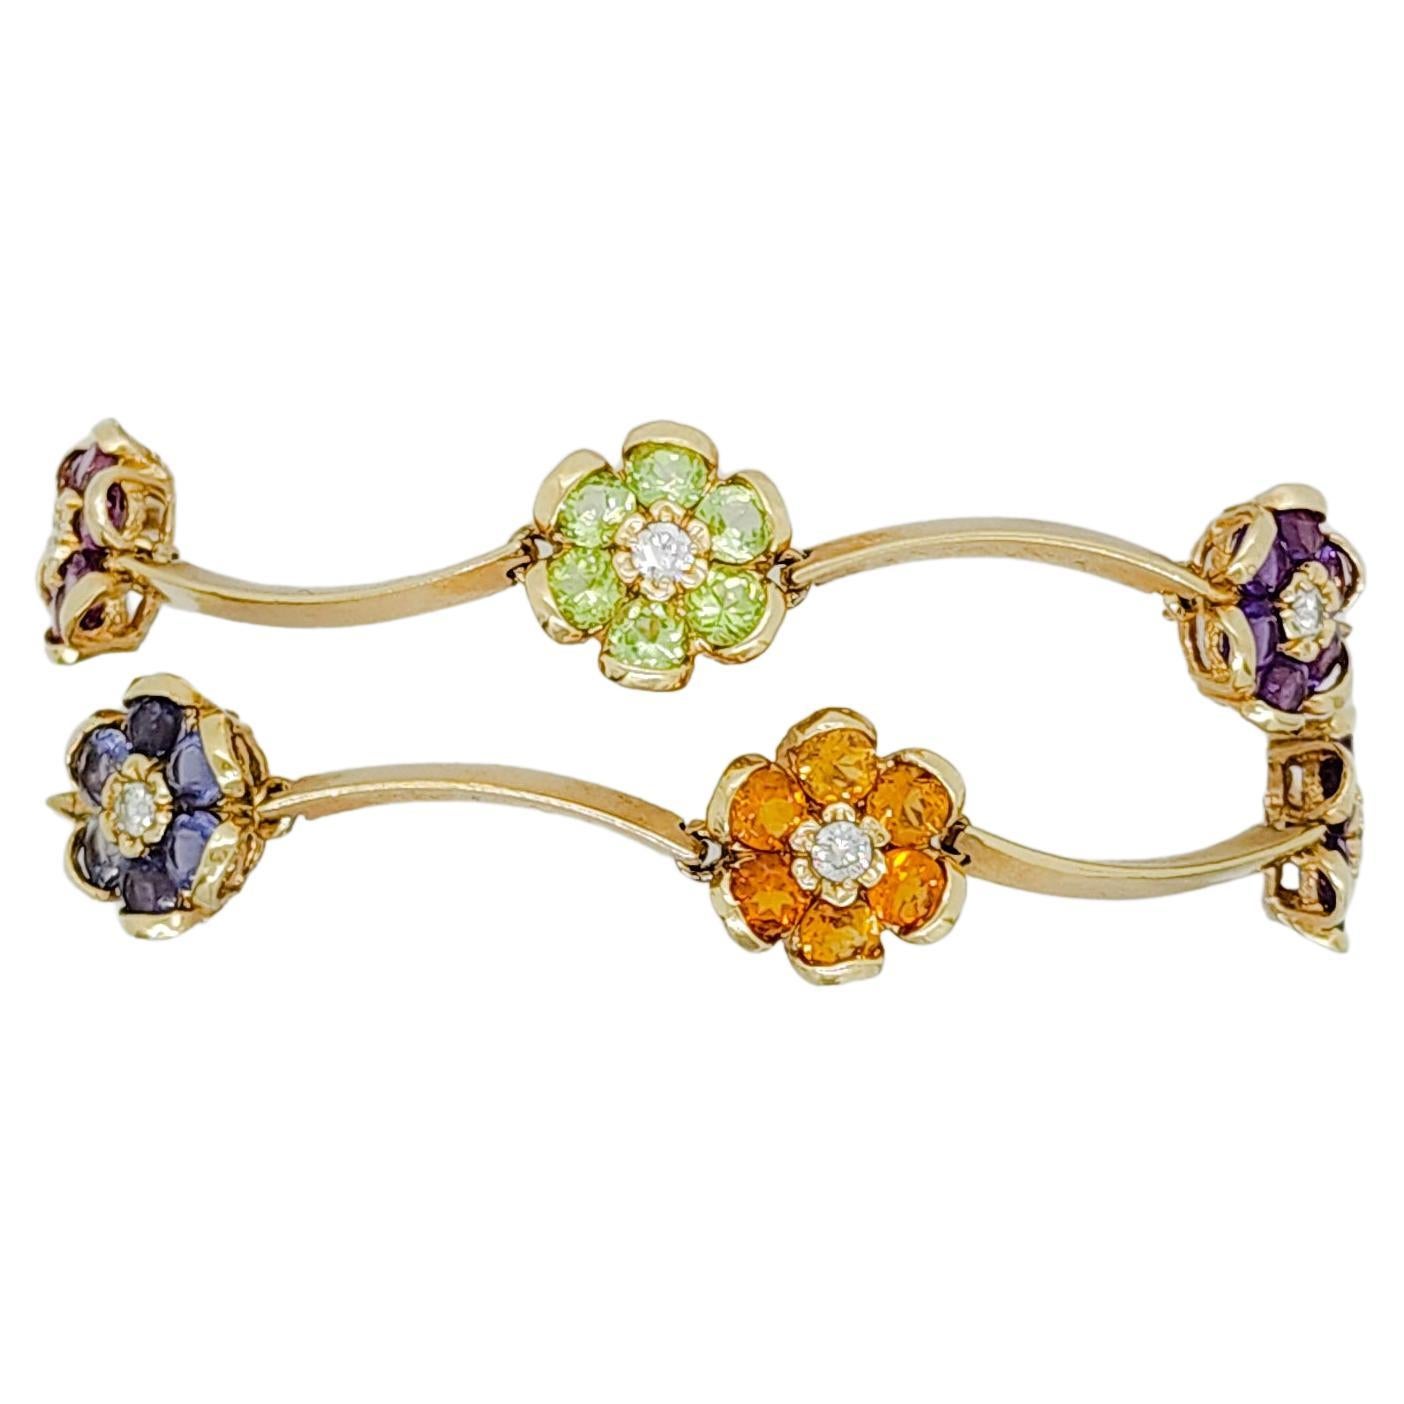 Multi Color Stone and White Diamond Floral Bracelet in 14k Yellow Gold